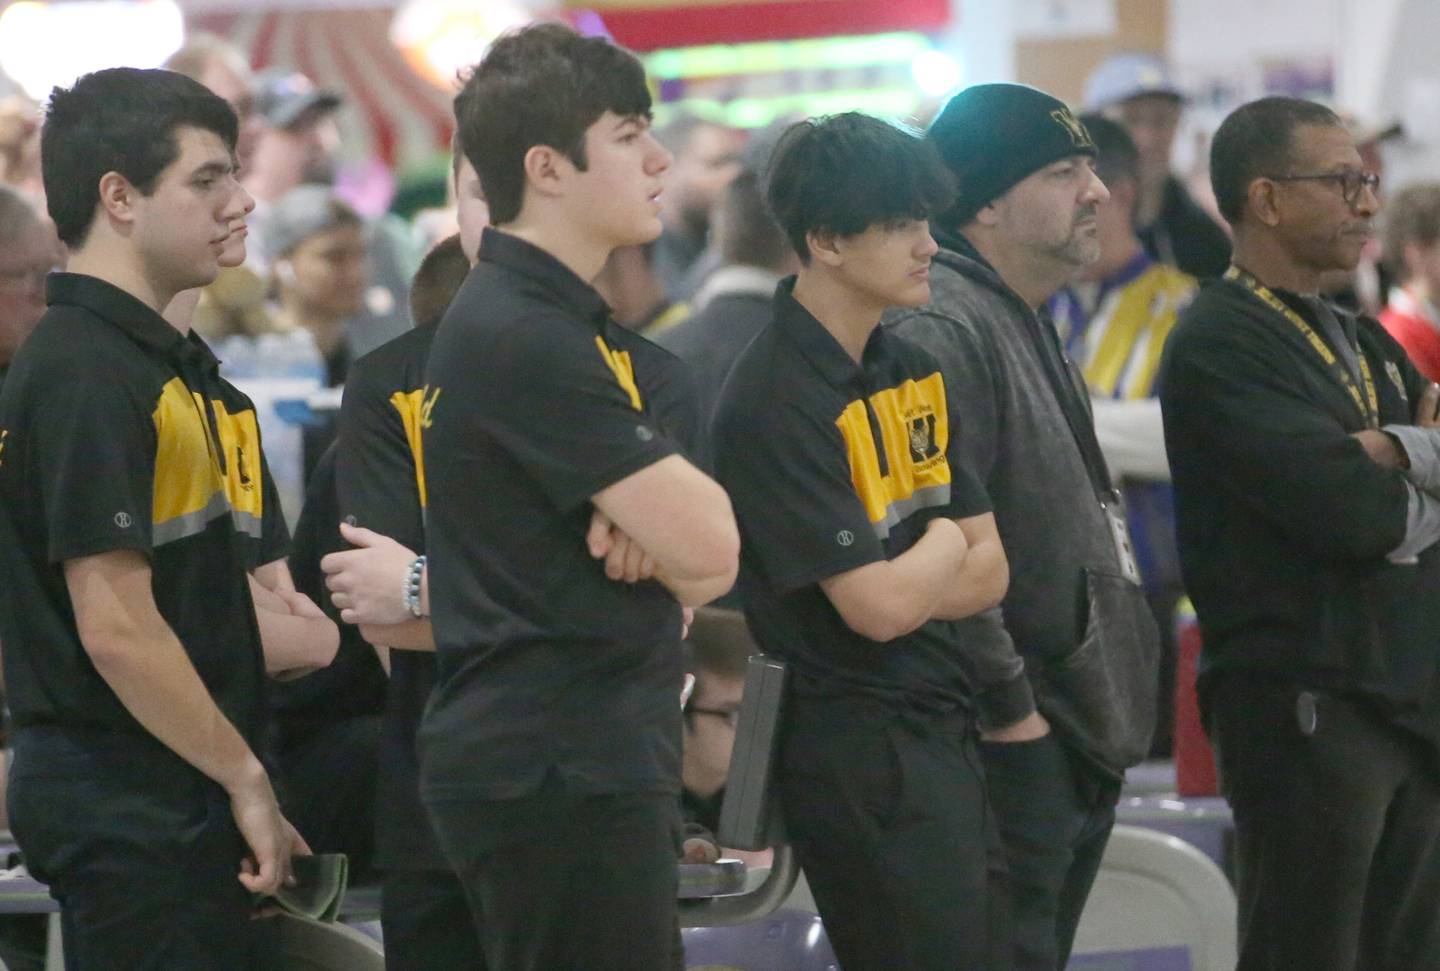 Members of the Joliet West boys bowling team compete in the Regional Bowling meet on Saturday, Jan. 14, 2023 at the Illinois Valley Super Bowl in Peru.